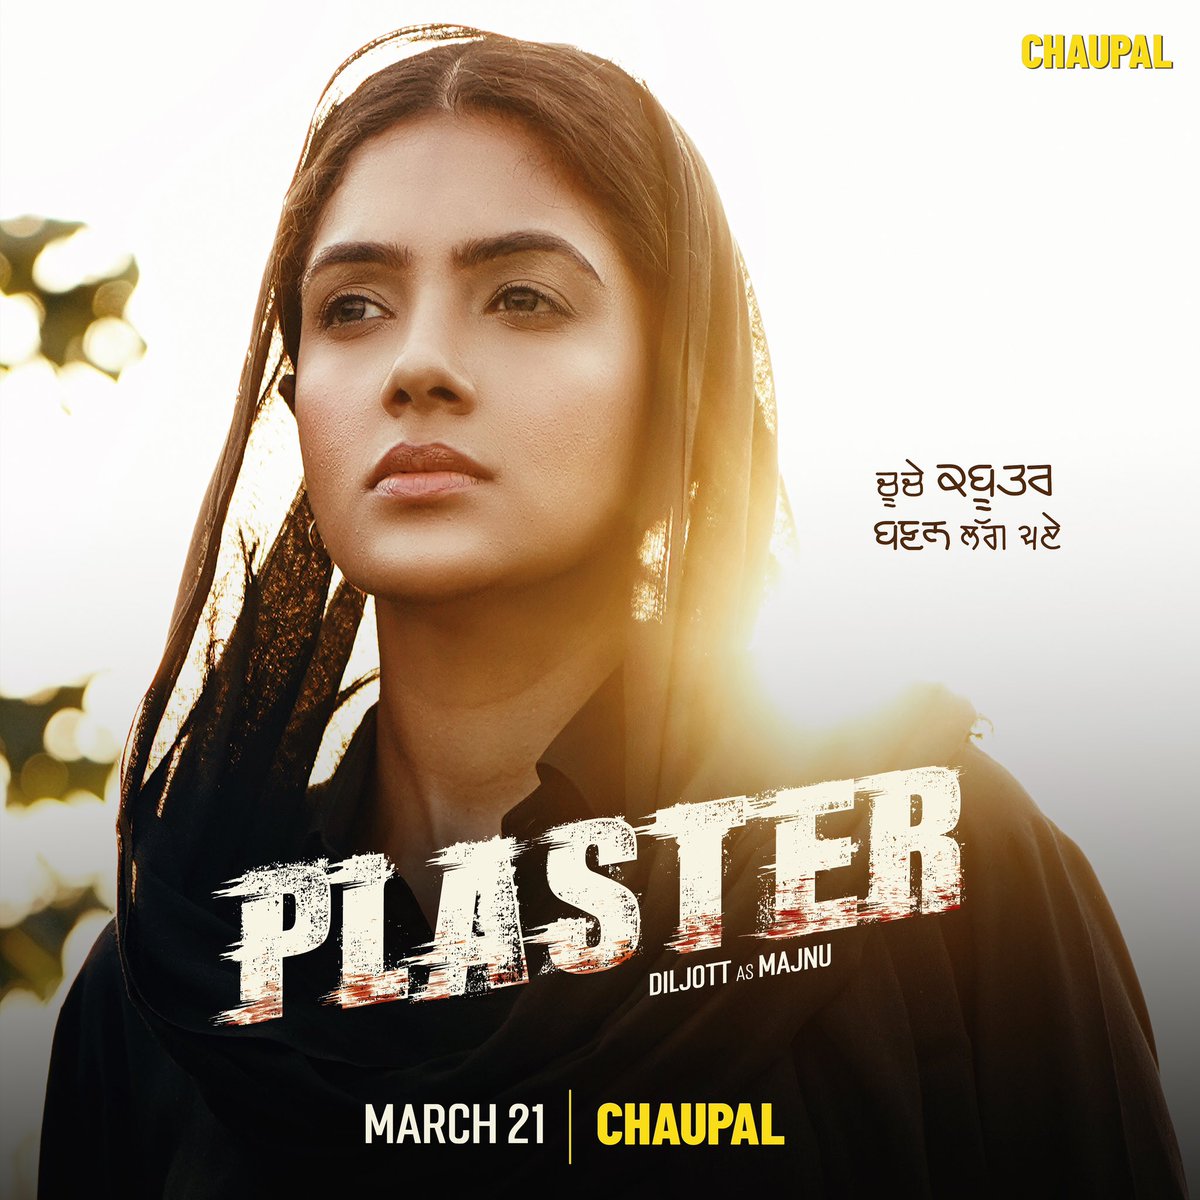 Meet Majnu in the web series ‘Plaster’ streaming from March 21 and onwards on Chaupal✨🎶🎬 #Plaster #WebSeries #Diljott